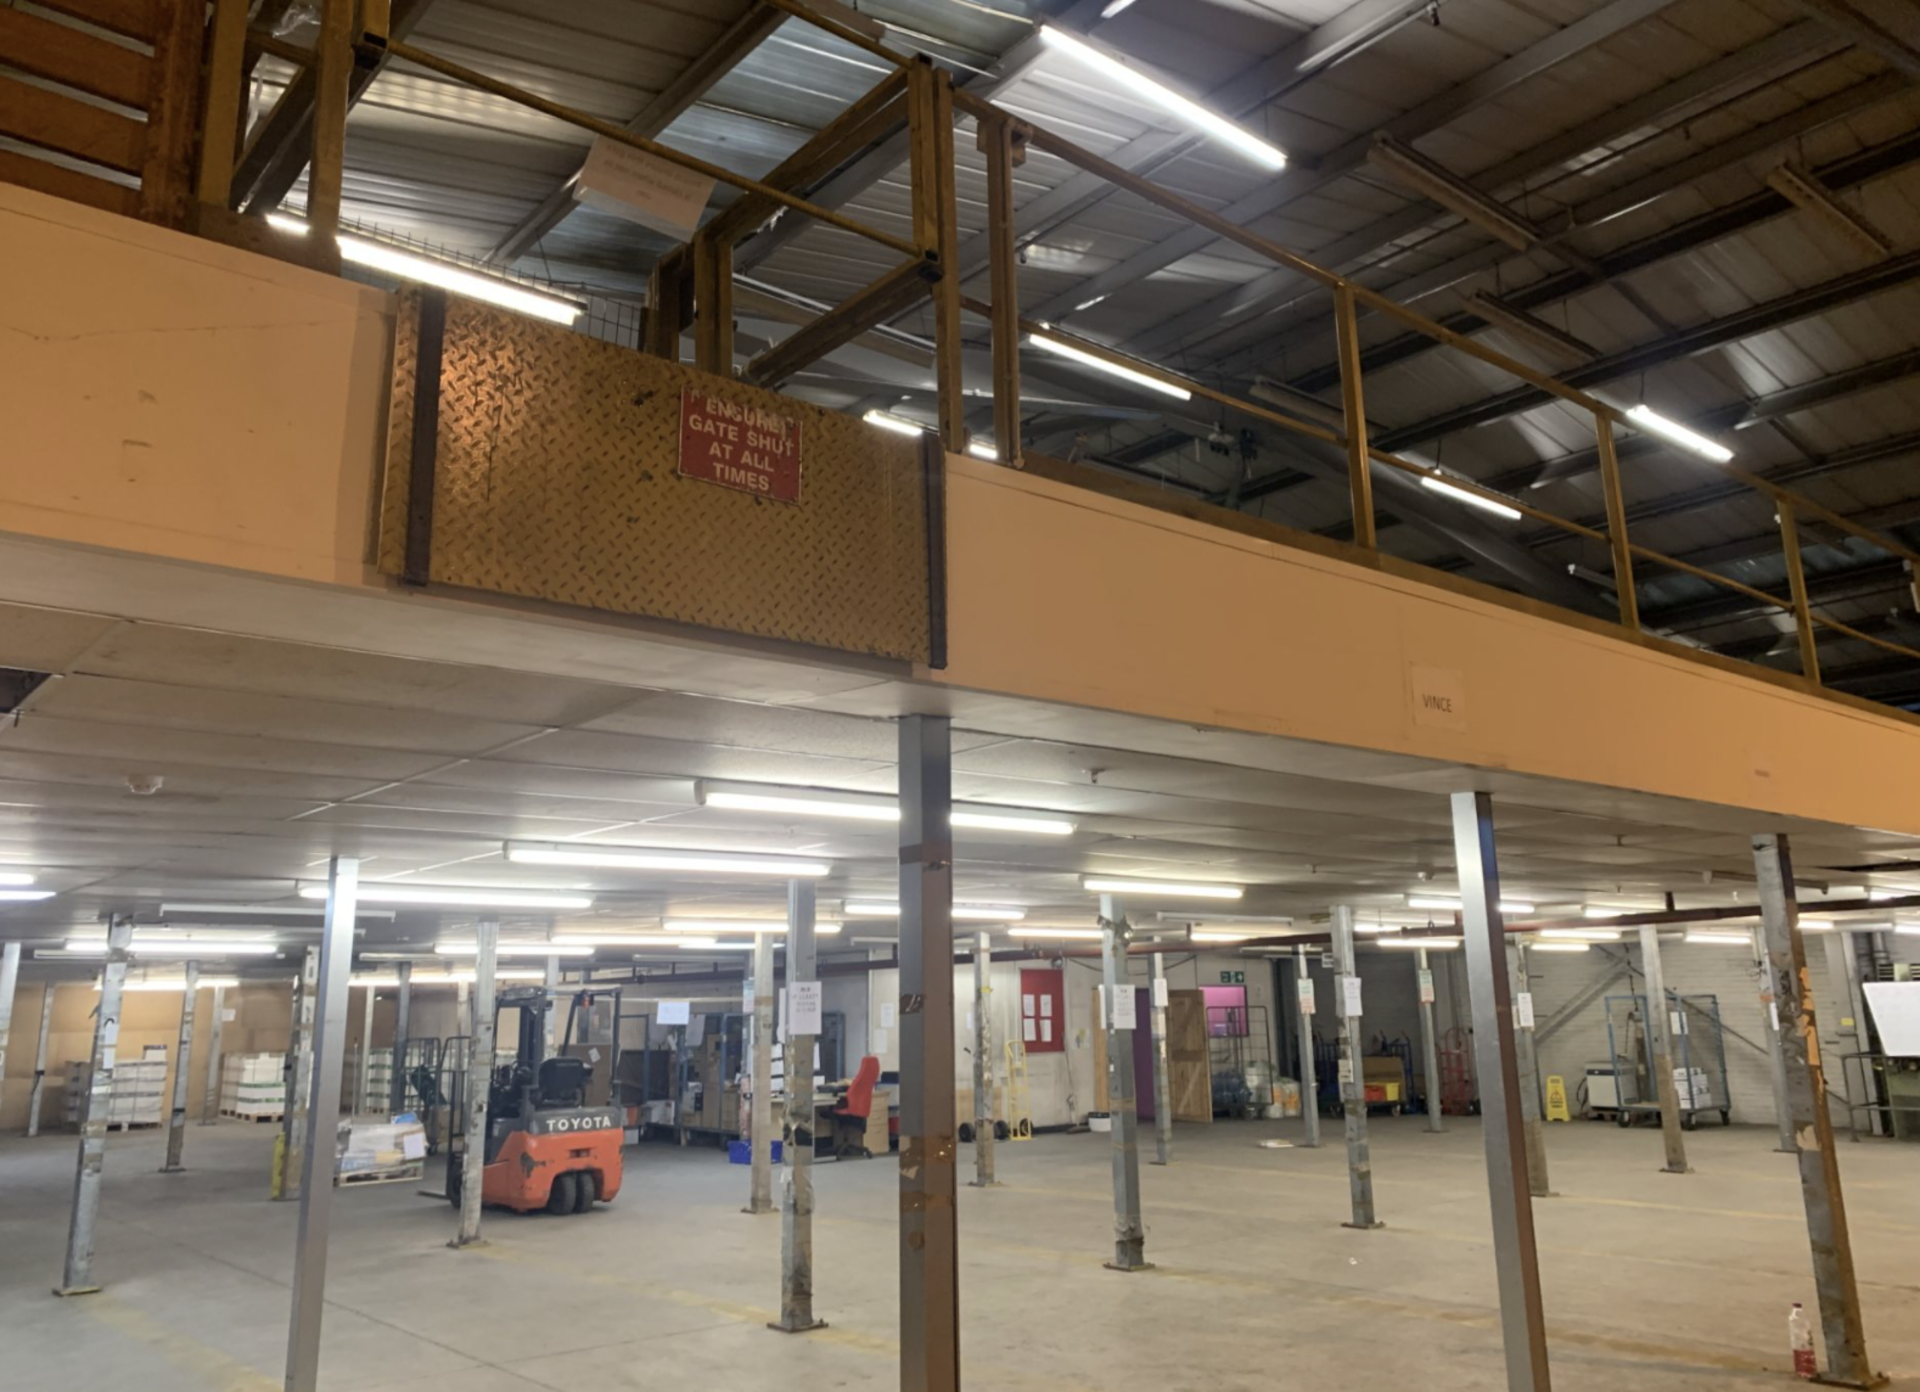 £500,000 MEZZANINE FLOOR 80m x 28m 3 stairs and loading bay inc - Image 11 of 21